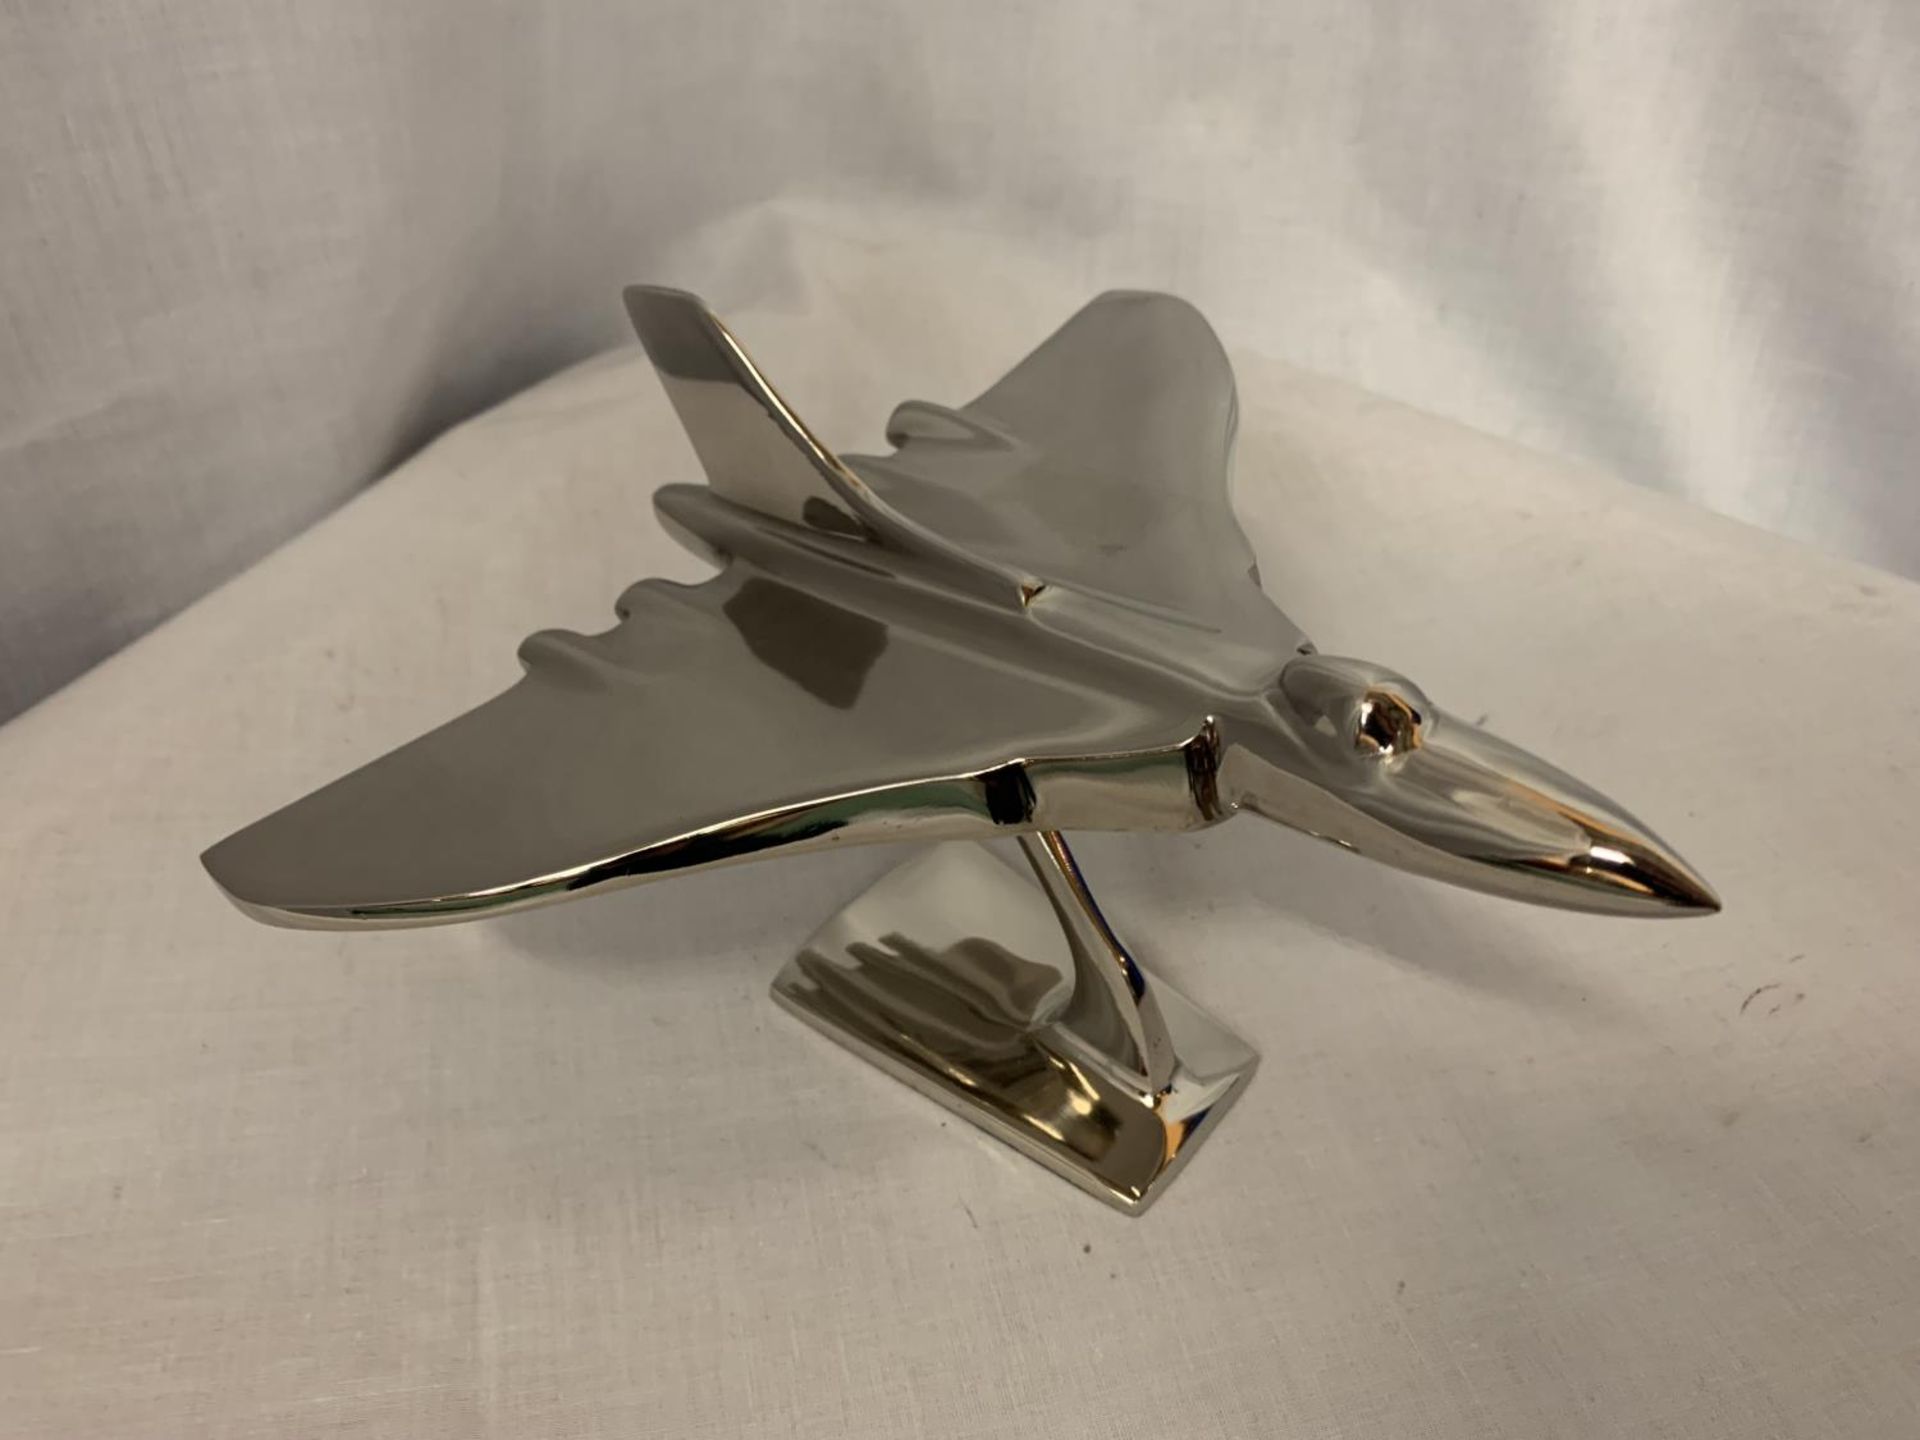 A CHROME MODEL OF AN AVRO VULCAN BOMBER ON STAND